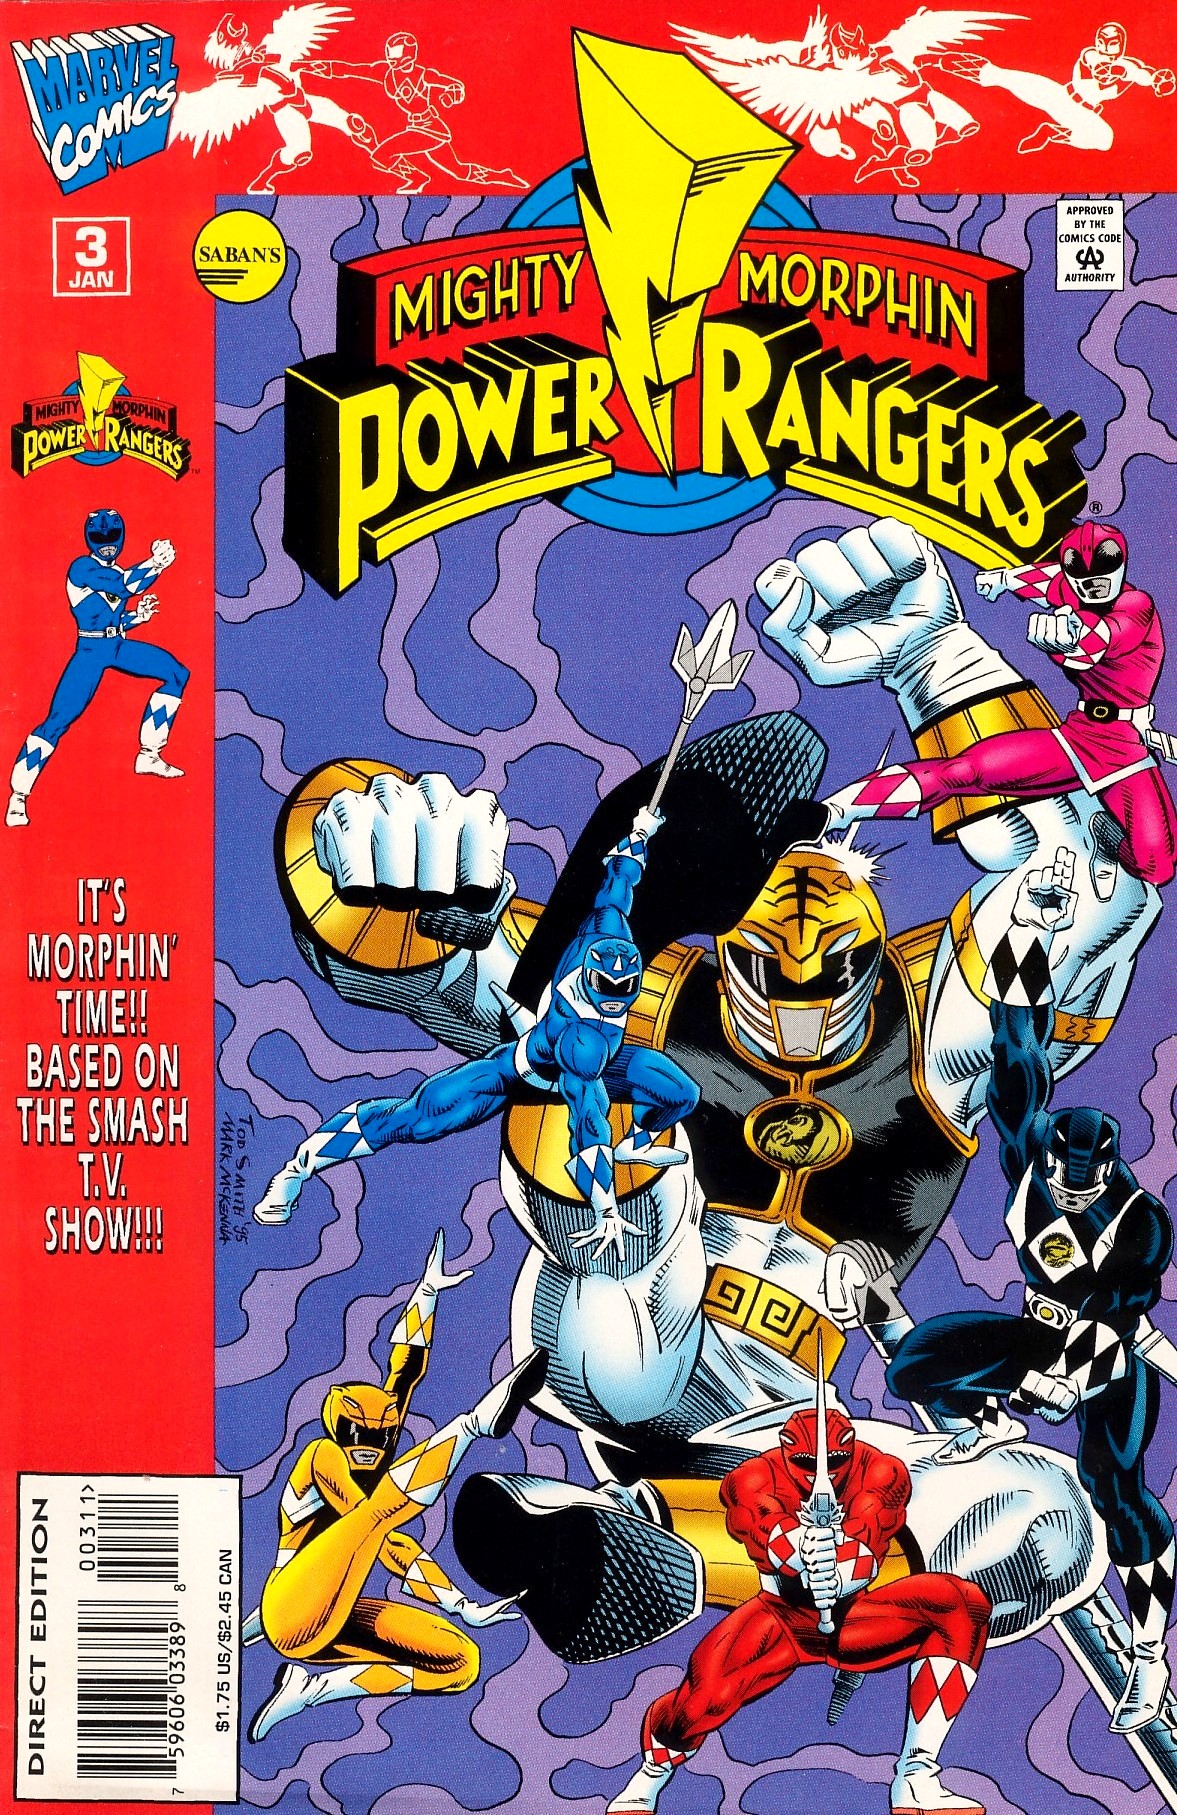 Read online Saban's Mighty Morphin' Power Rangers comic -  Issue #3 - 1